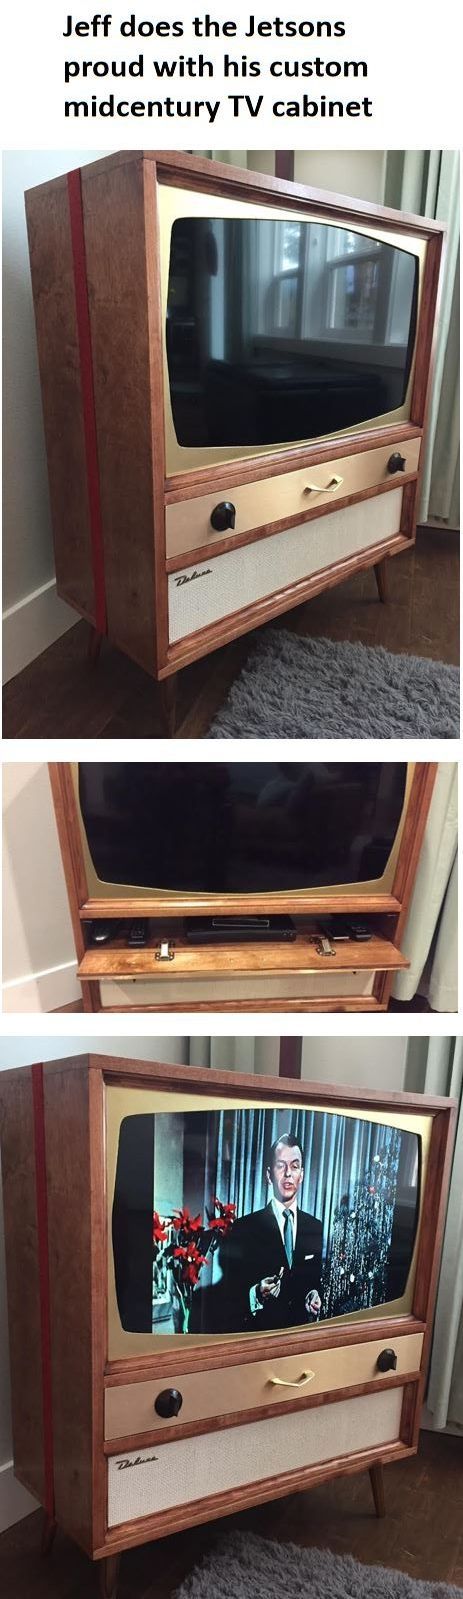 Awesome Well Known Modern TV Cabinets For Flat Screens Within Jeff Builds A Midcentury Modern Tv Cabinet For His Flat Screen Tv (View 20 of 50)